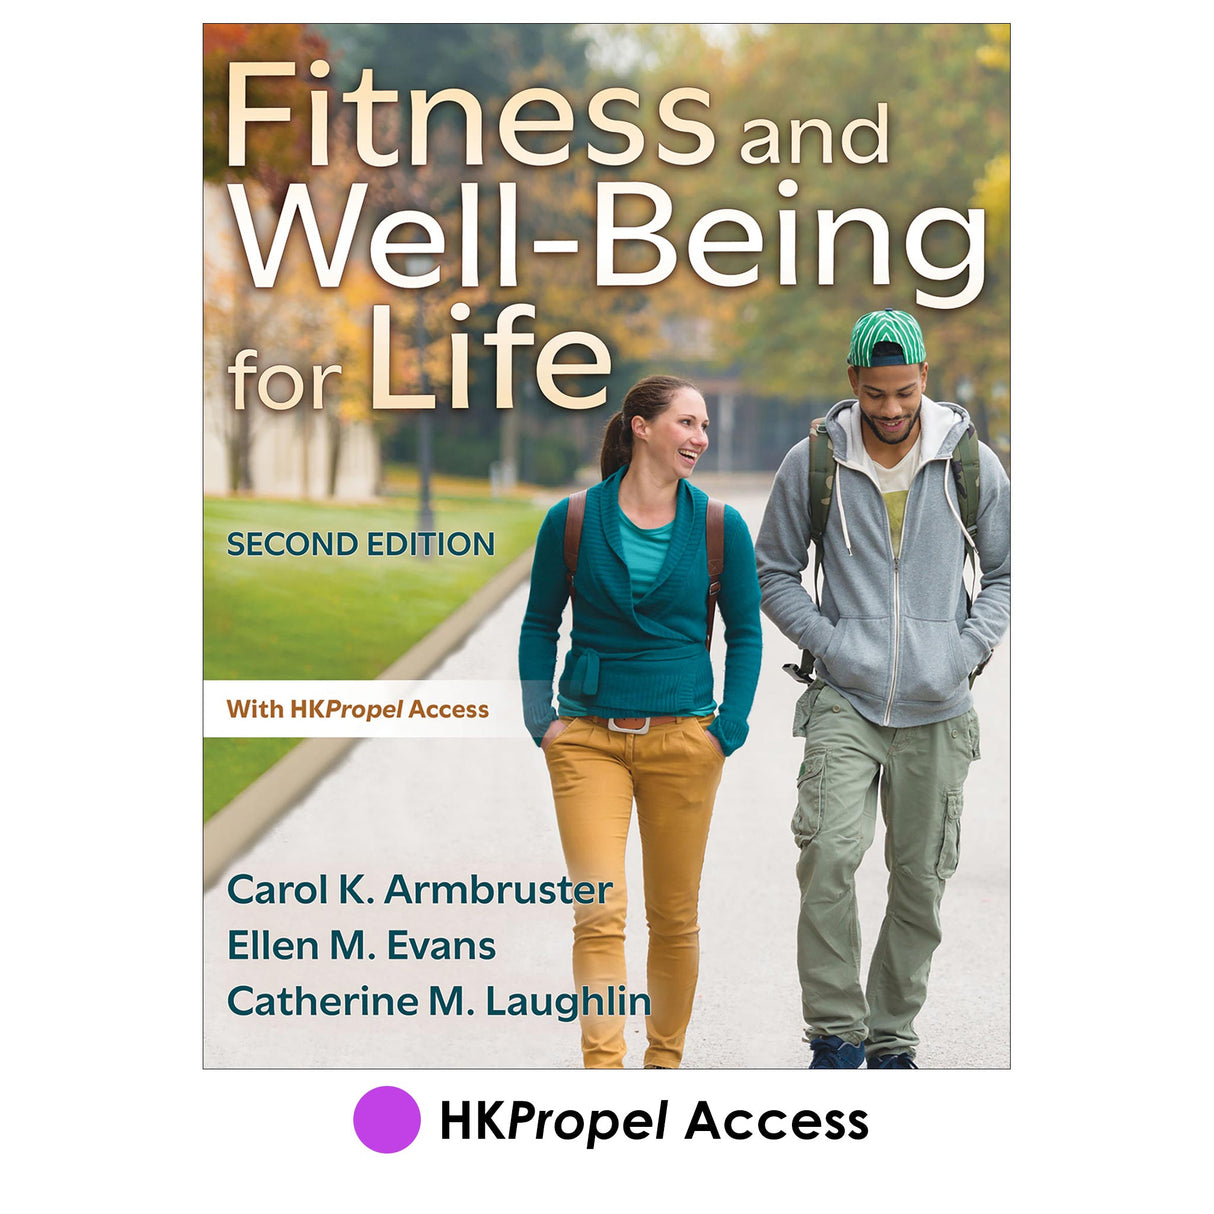 Fitness and Well-Being for Life 2nd Edition HKPropel Access